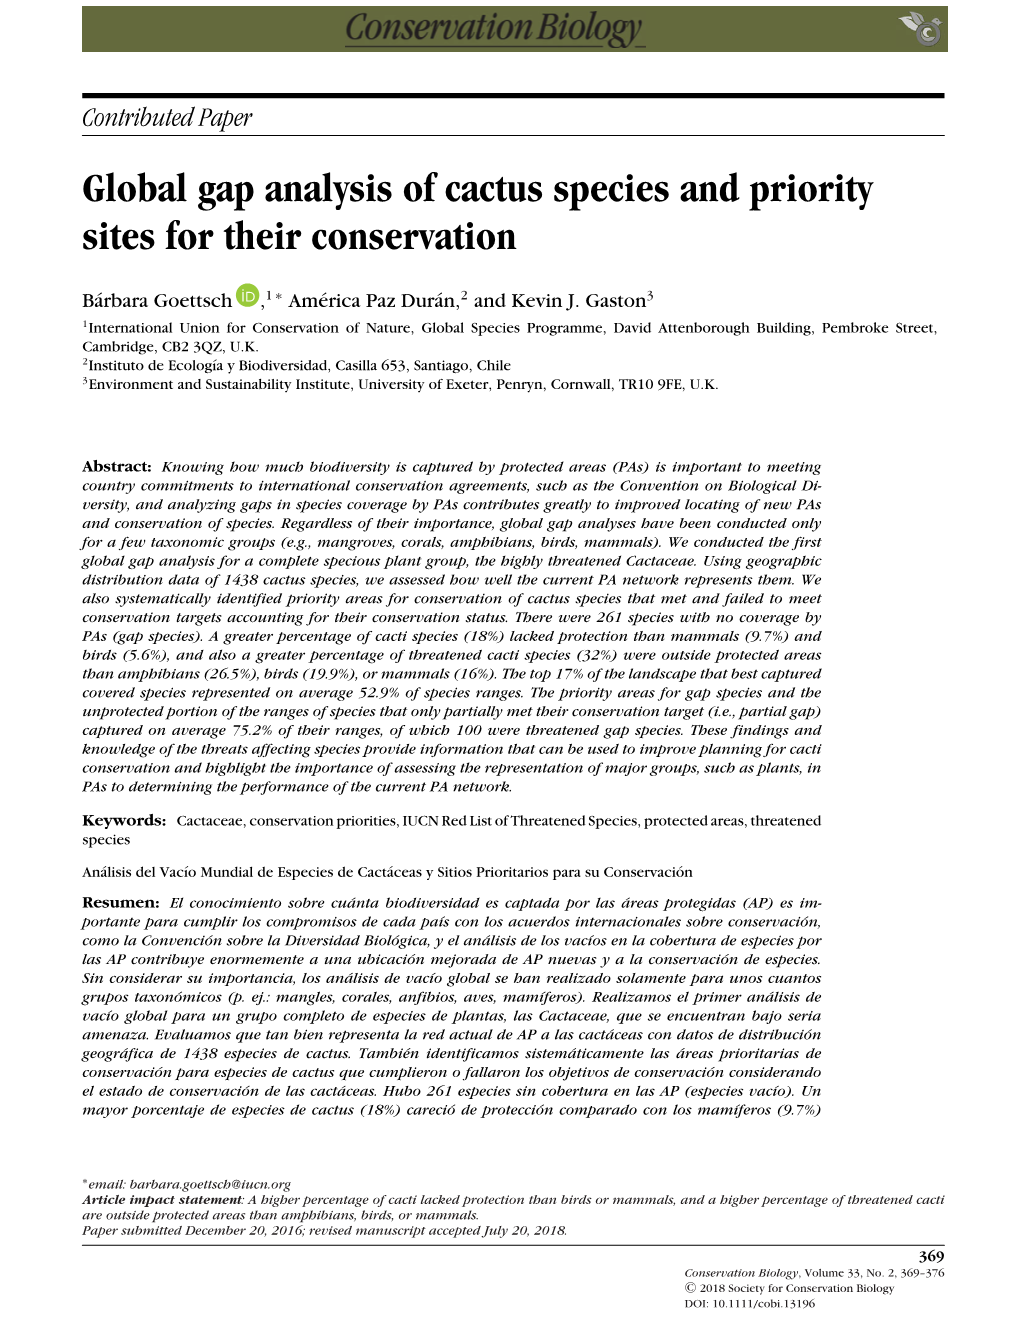 Global Gap Analysis of Cactus Species and Priority Sites for Their Conservation